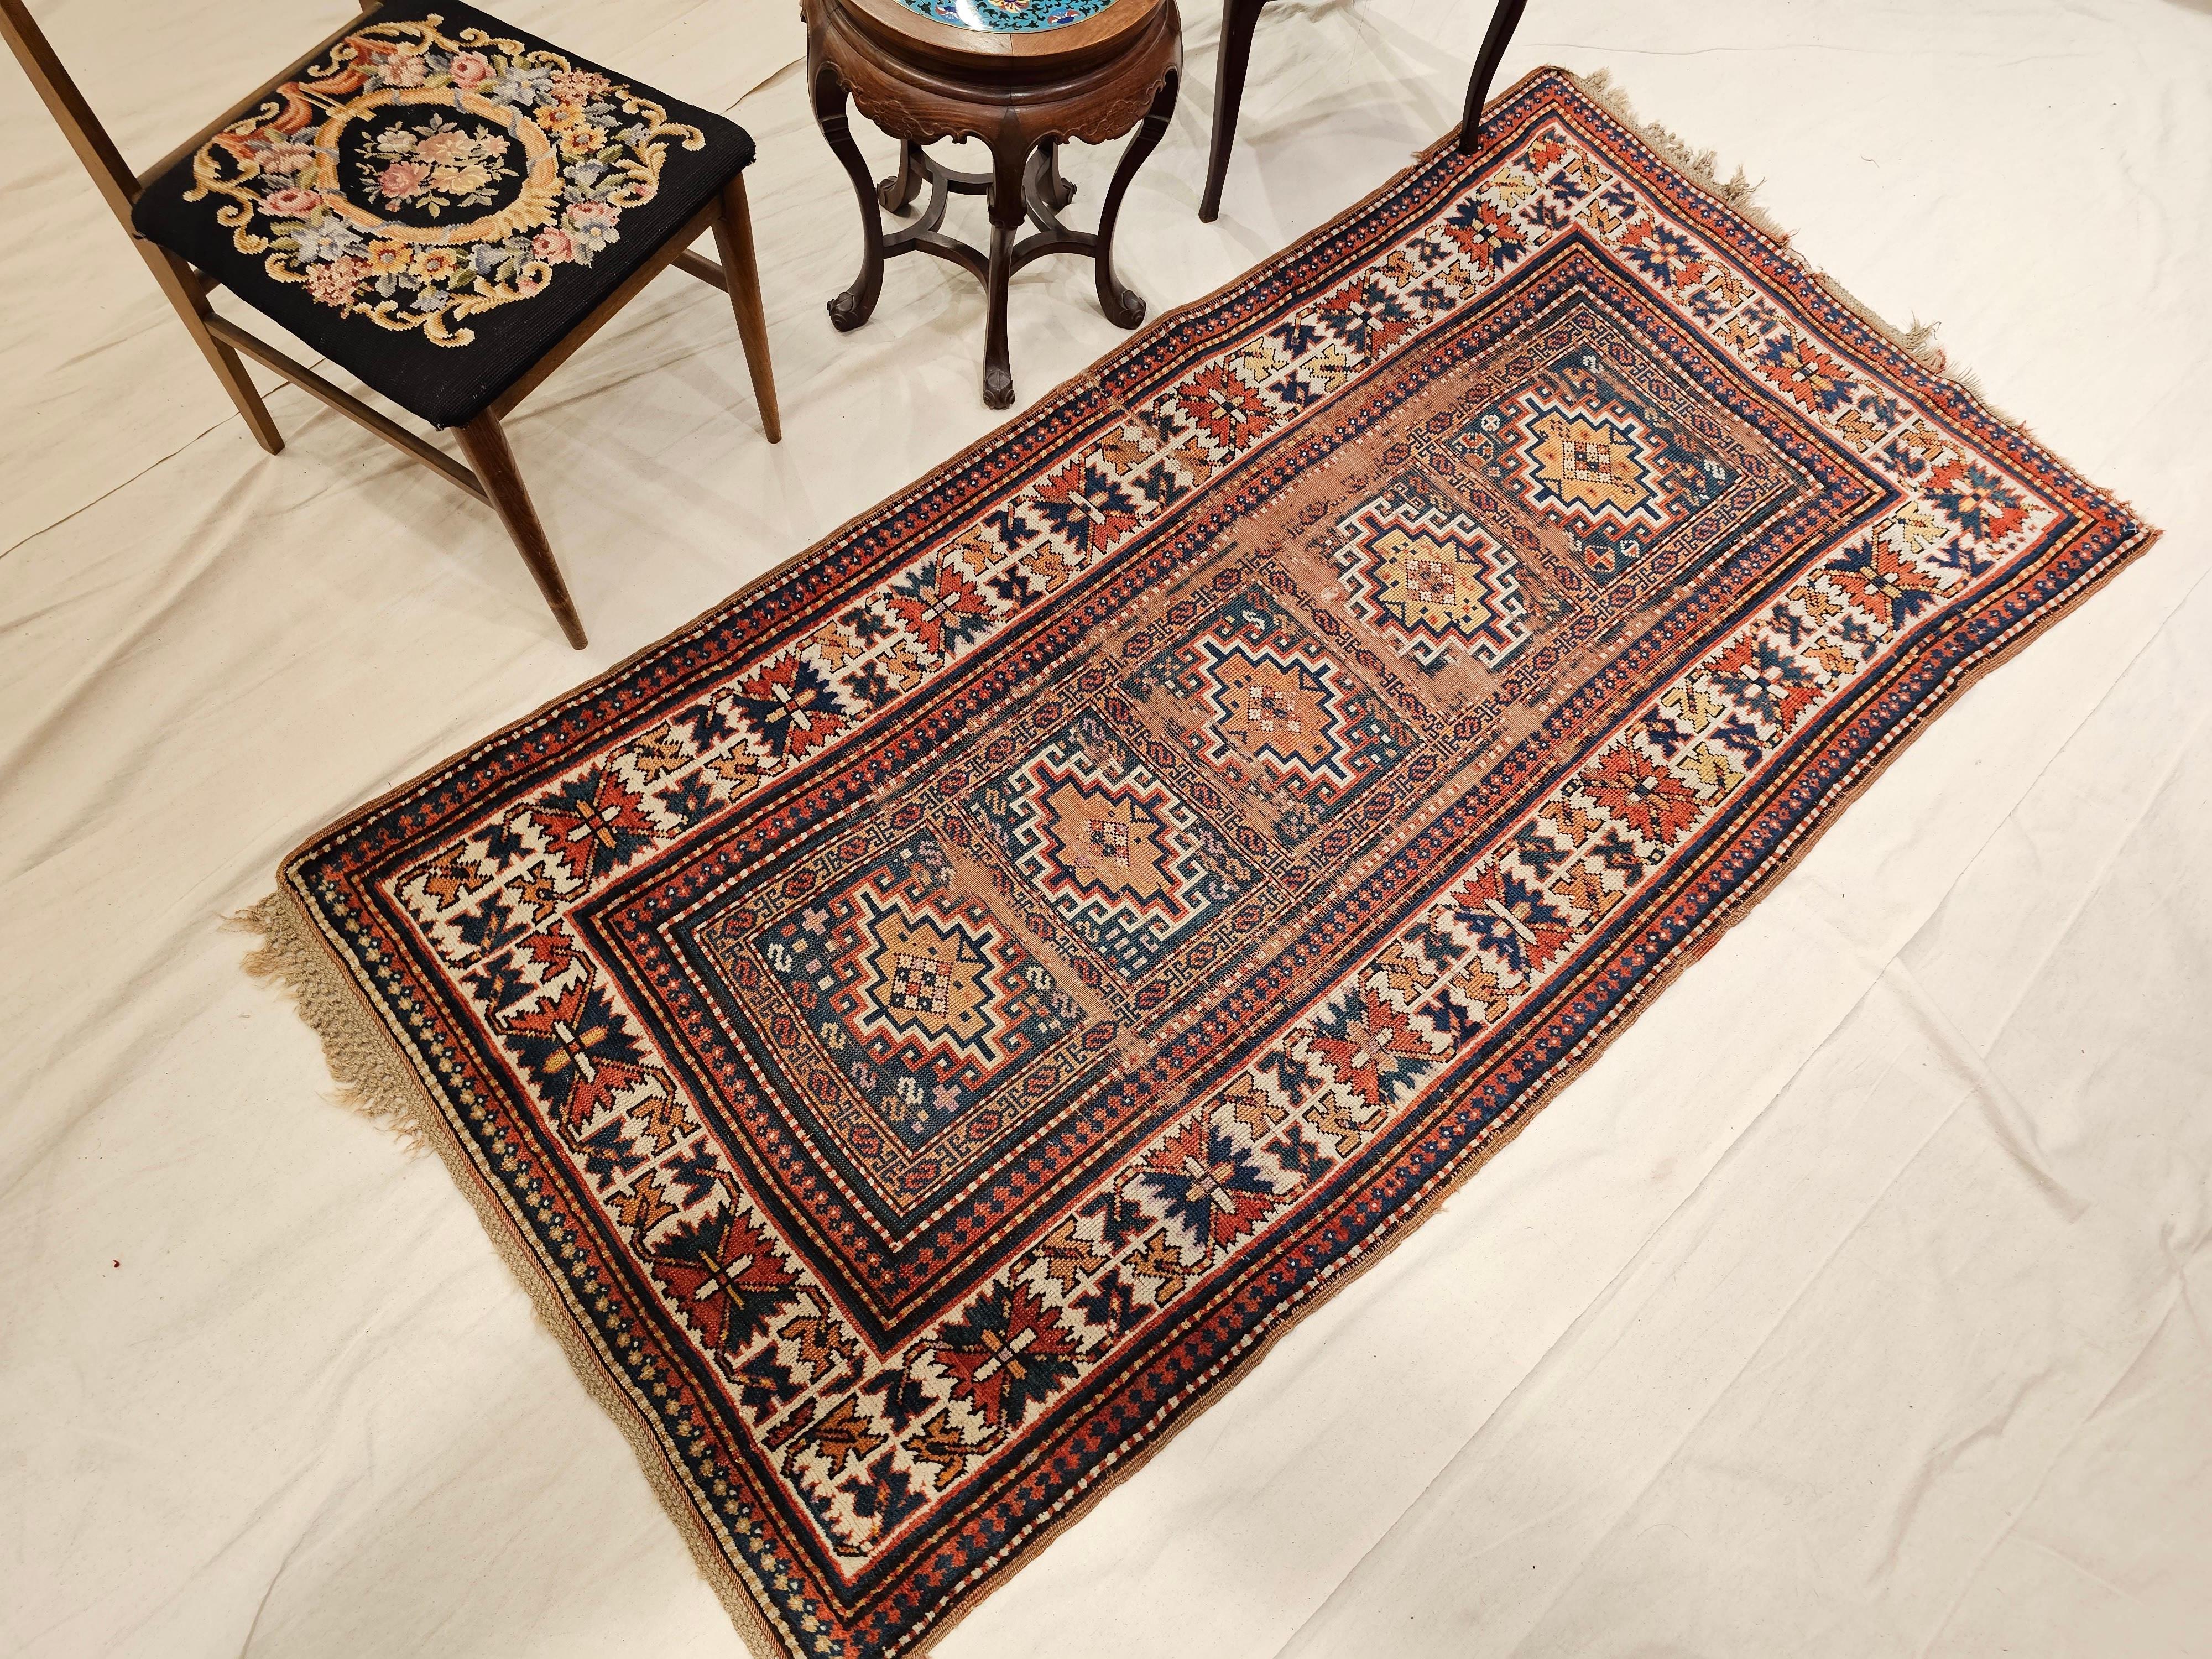 19th Century Caucasian Kazak Area Rug in Geometric Pattern in Blue, Ivory, Red For Sale 5